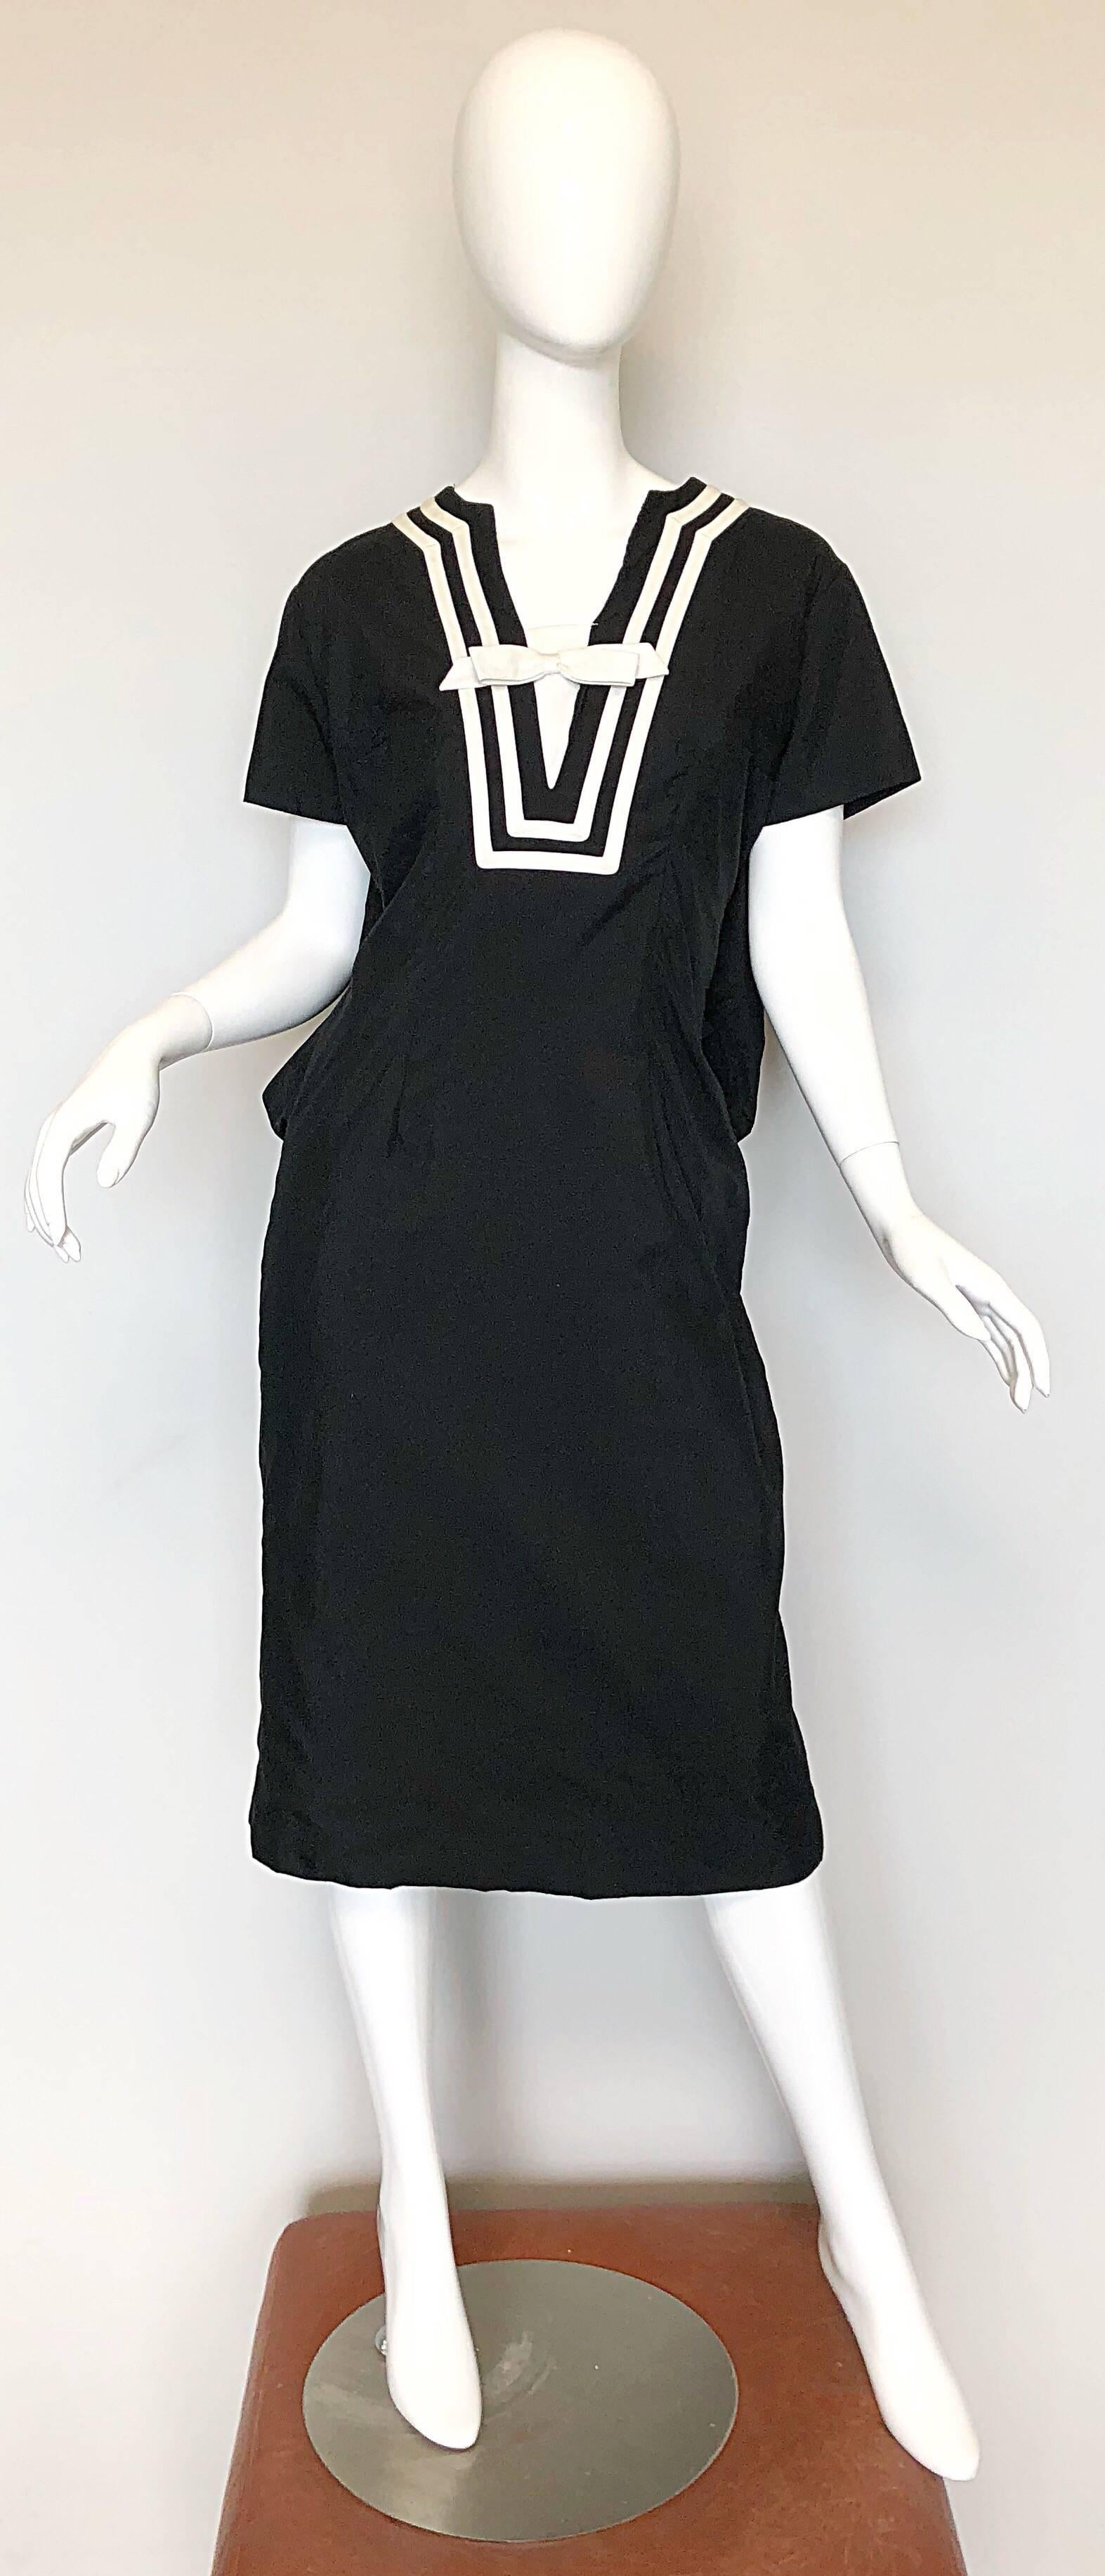 Chic 1950s SUZY PERETTE black and white lightweight soft cotton nautical dress! Features a bow above center bust. Gathers in the back create a flattering and forgiving silhouette. Full metal zipper up the side with hook-and-eye closure. Very well